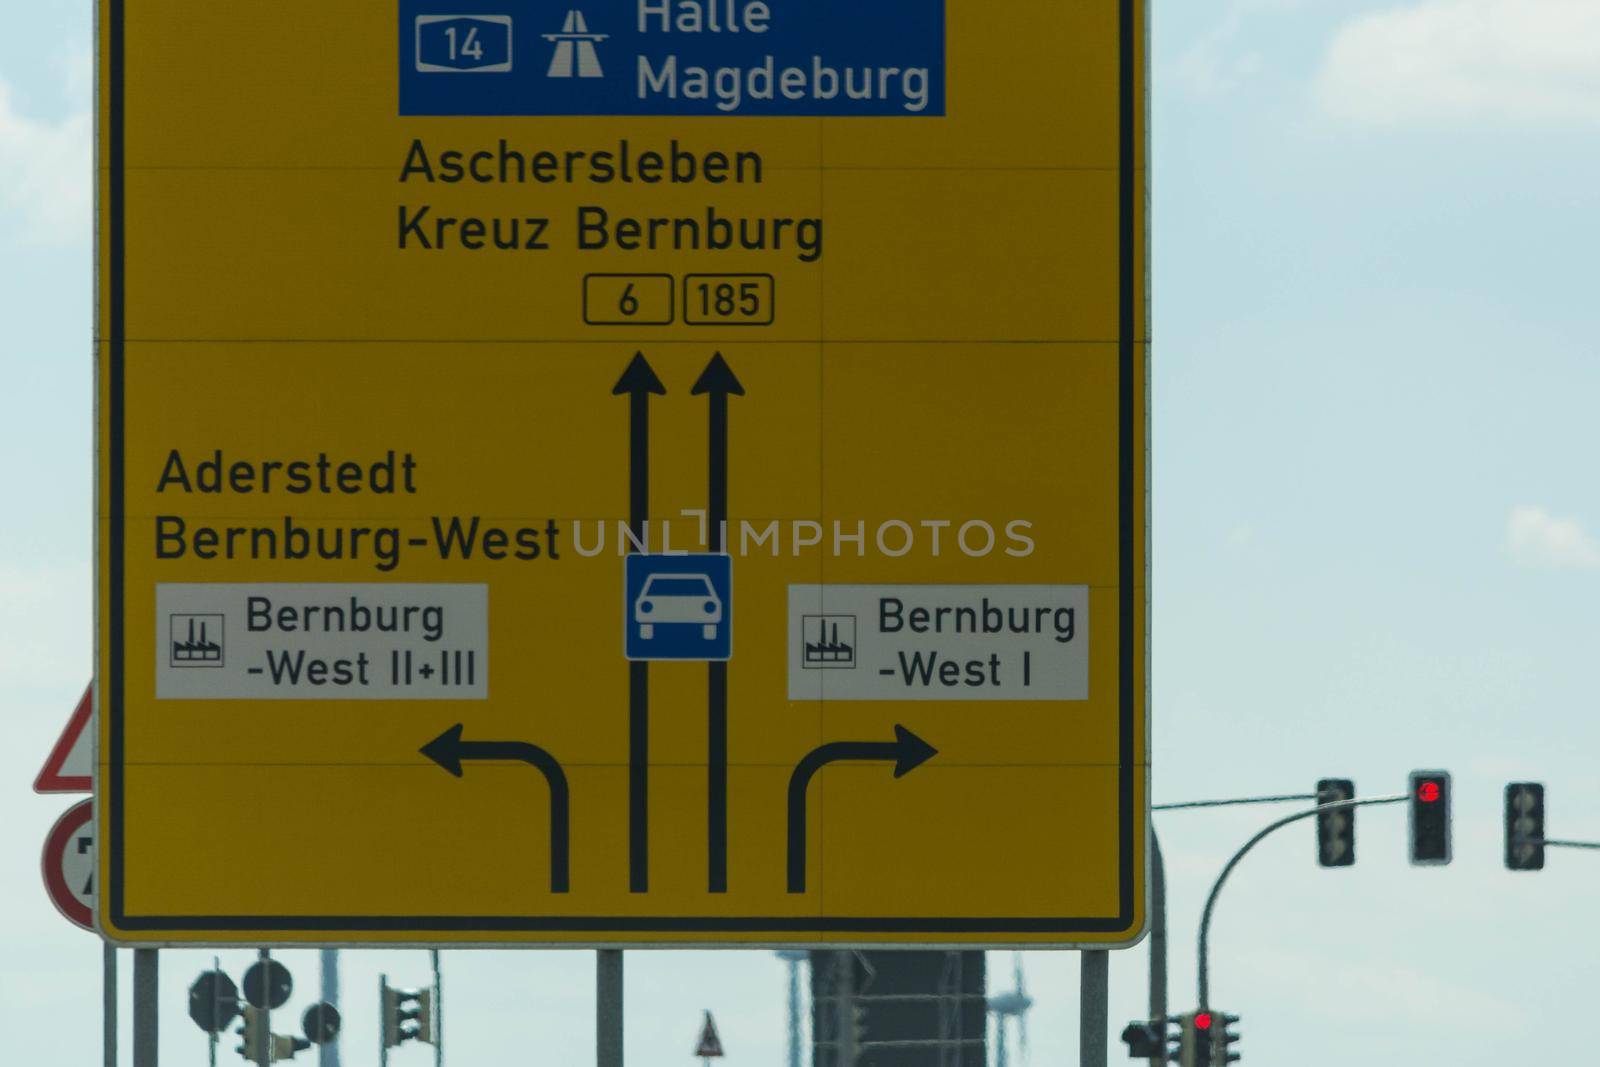 Street signs at the german highway showing the road to Magdeburg, Halle